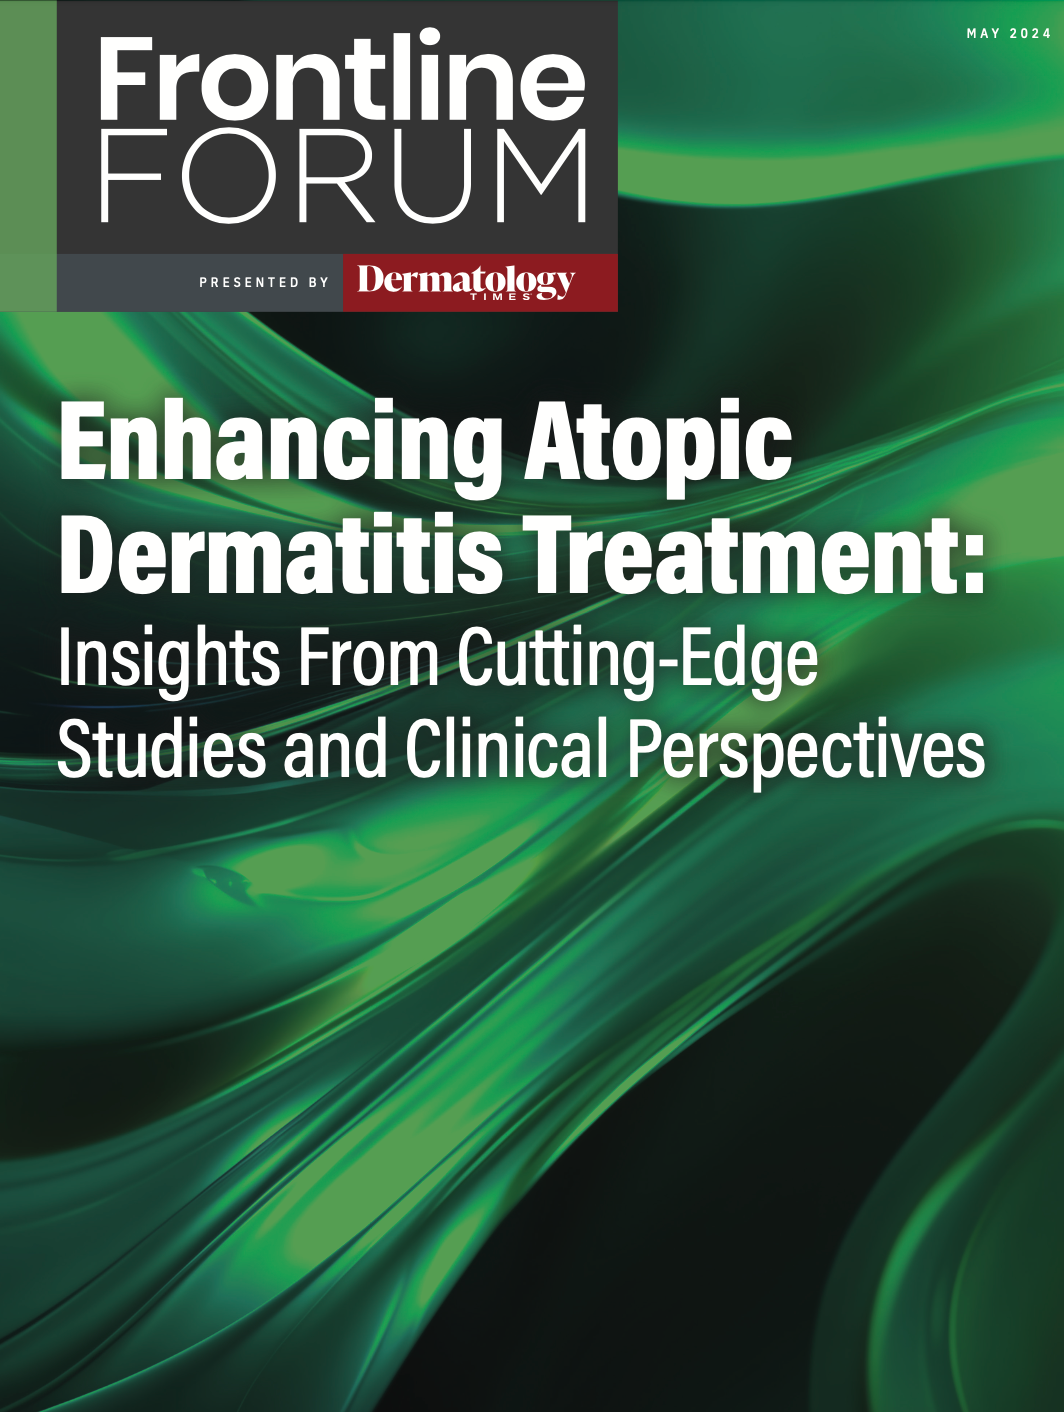 Enhancing Atopic Dermatitis Treatment: Insights From Cutting-Edge Studies and Clinical Perspectives Part 1